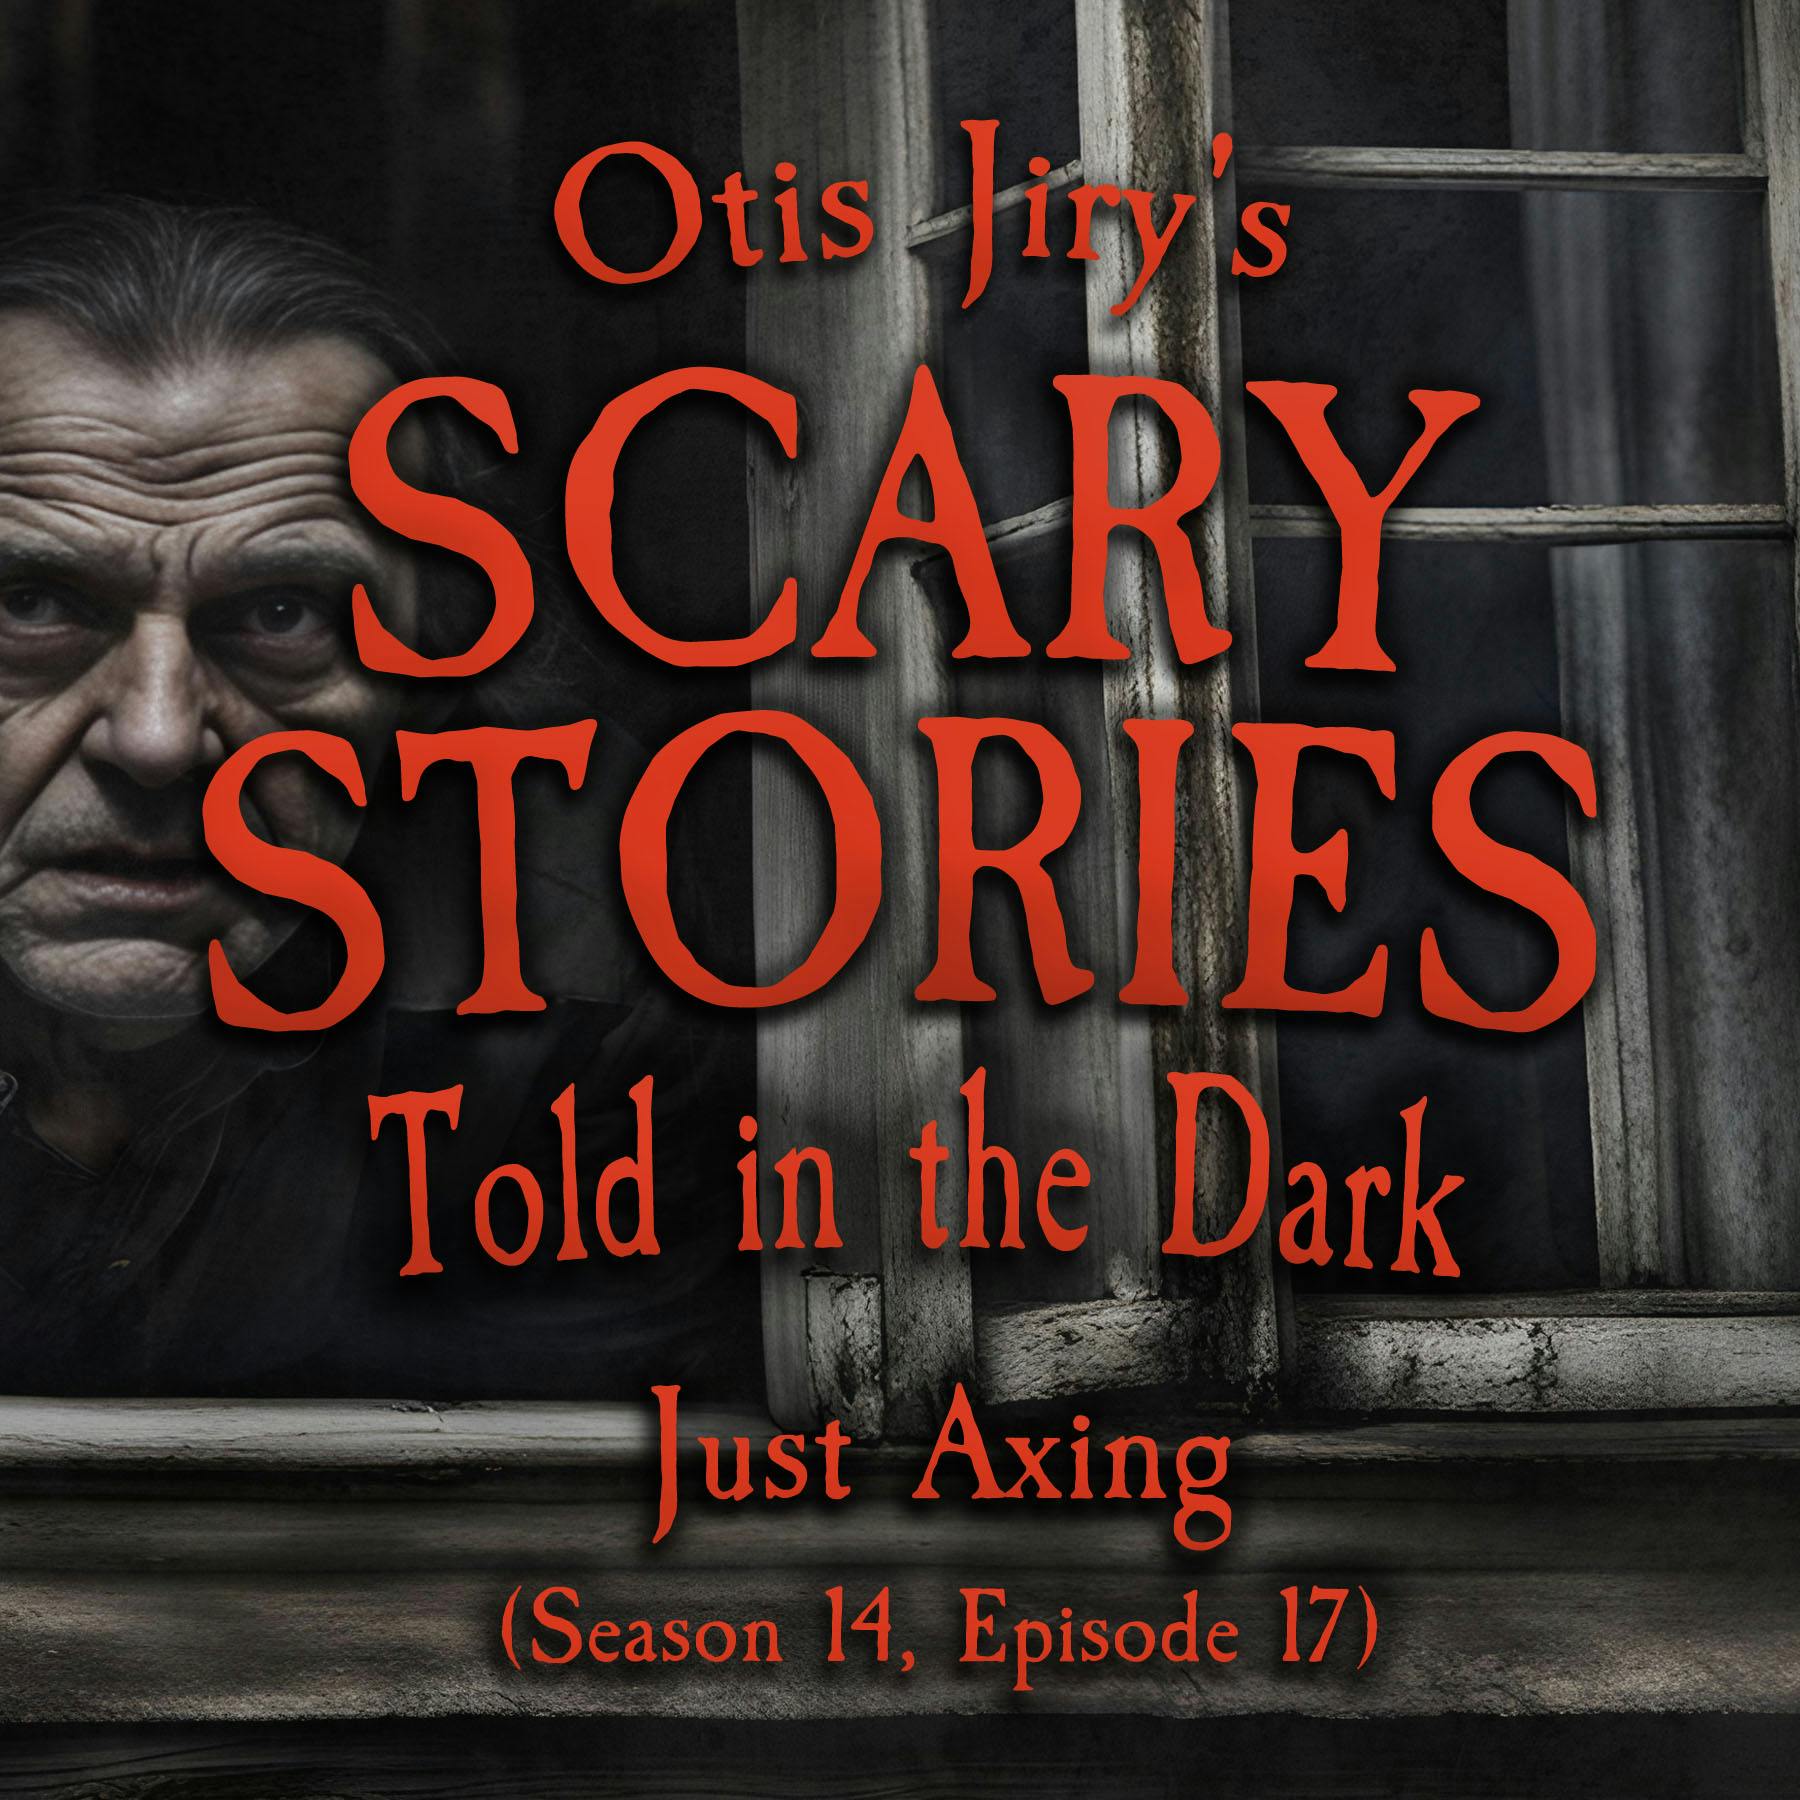 S14E18 - ”Just Axing” – Scary Stories Told in the Dark